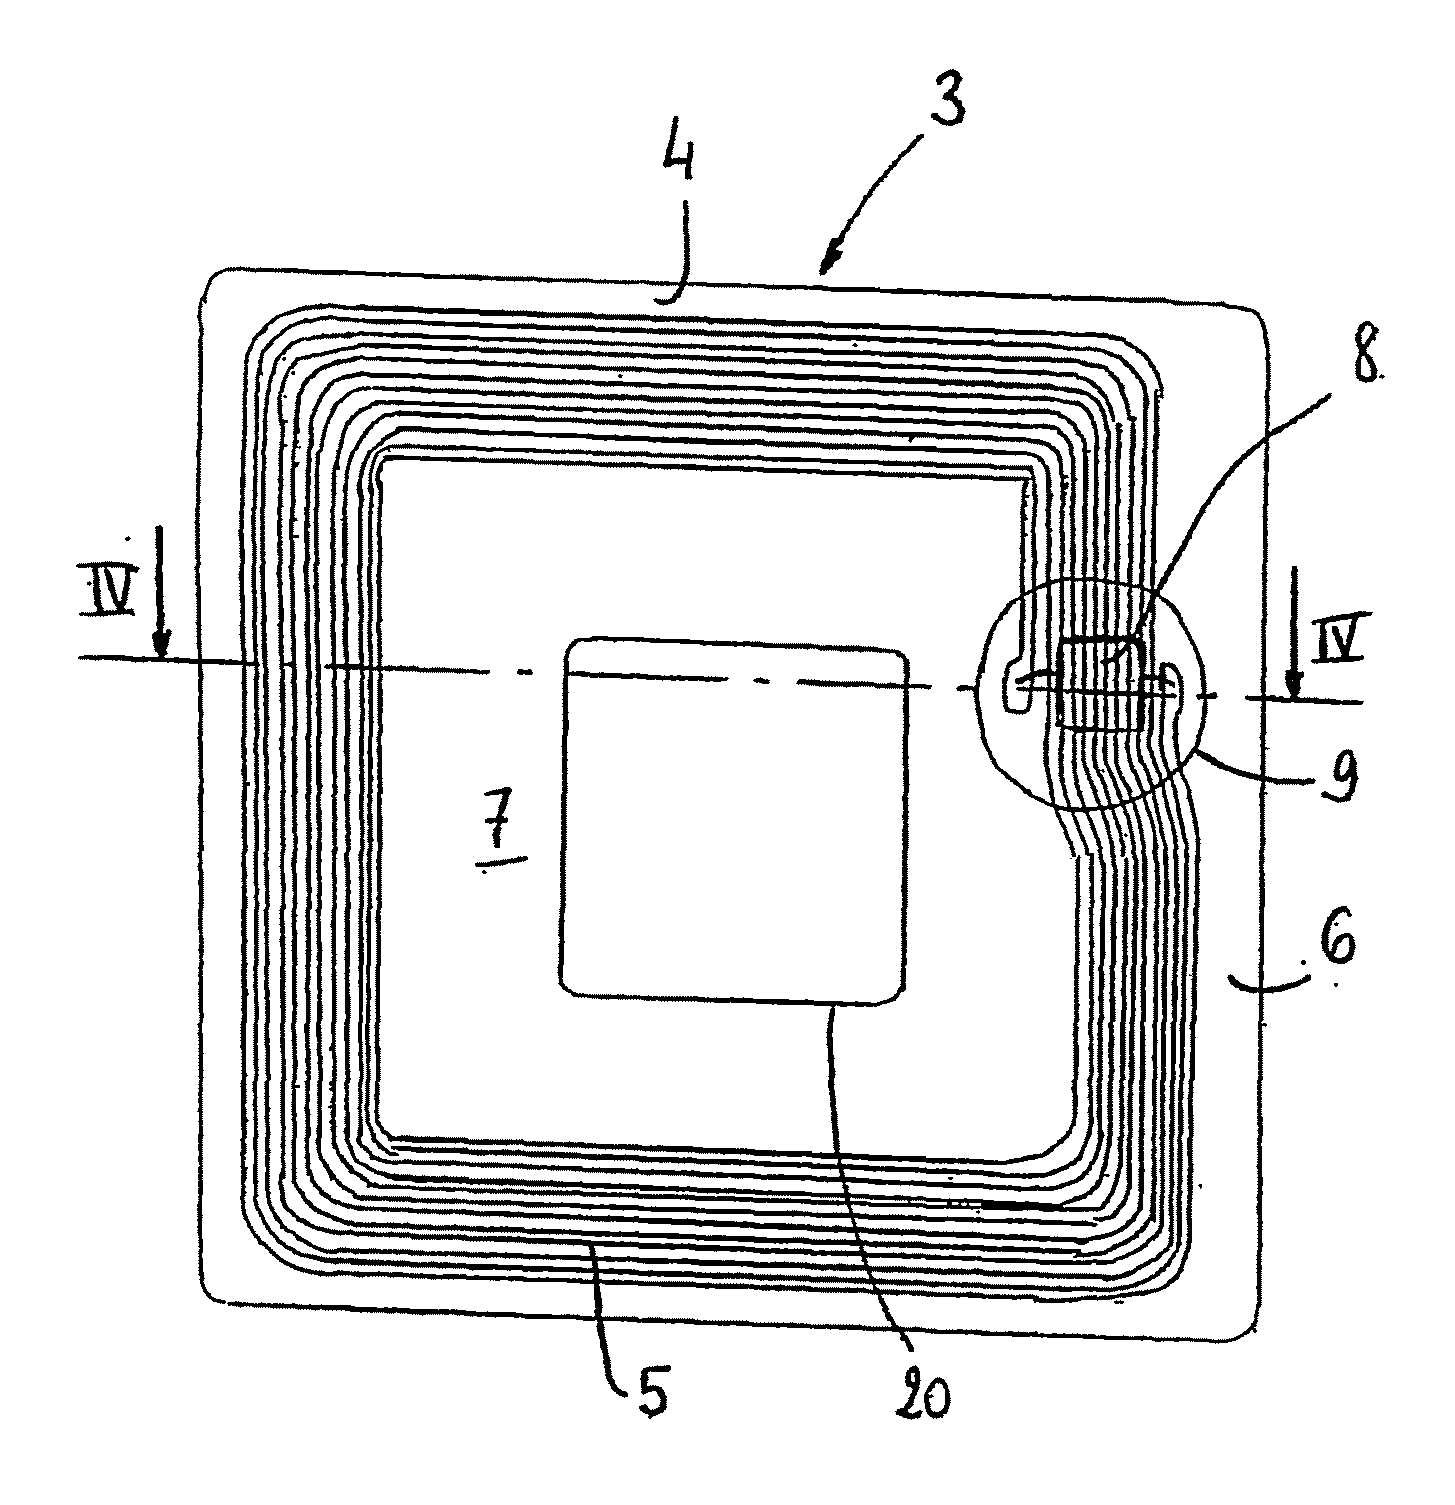 Radiofrequency identification device and method for producing said device